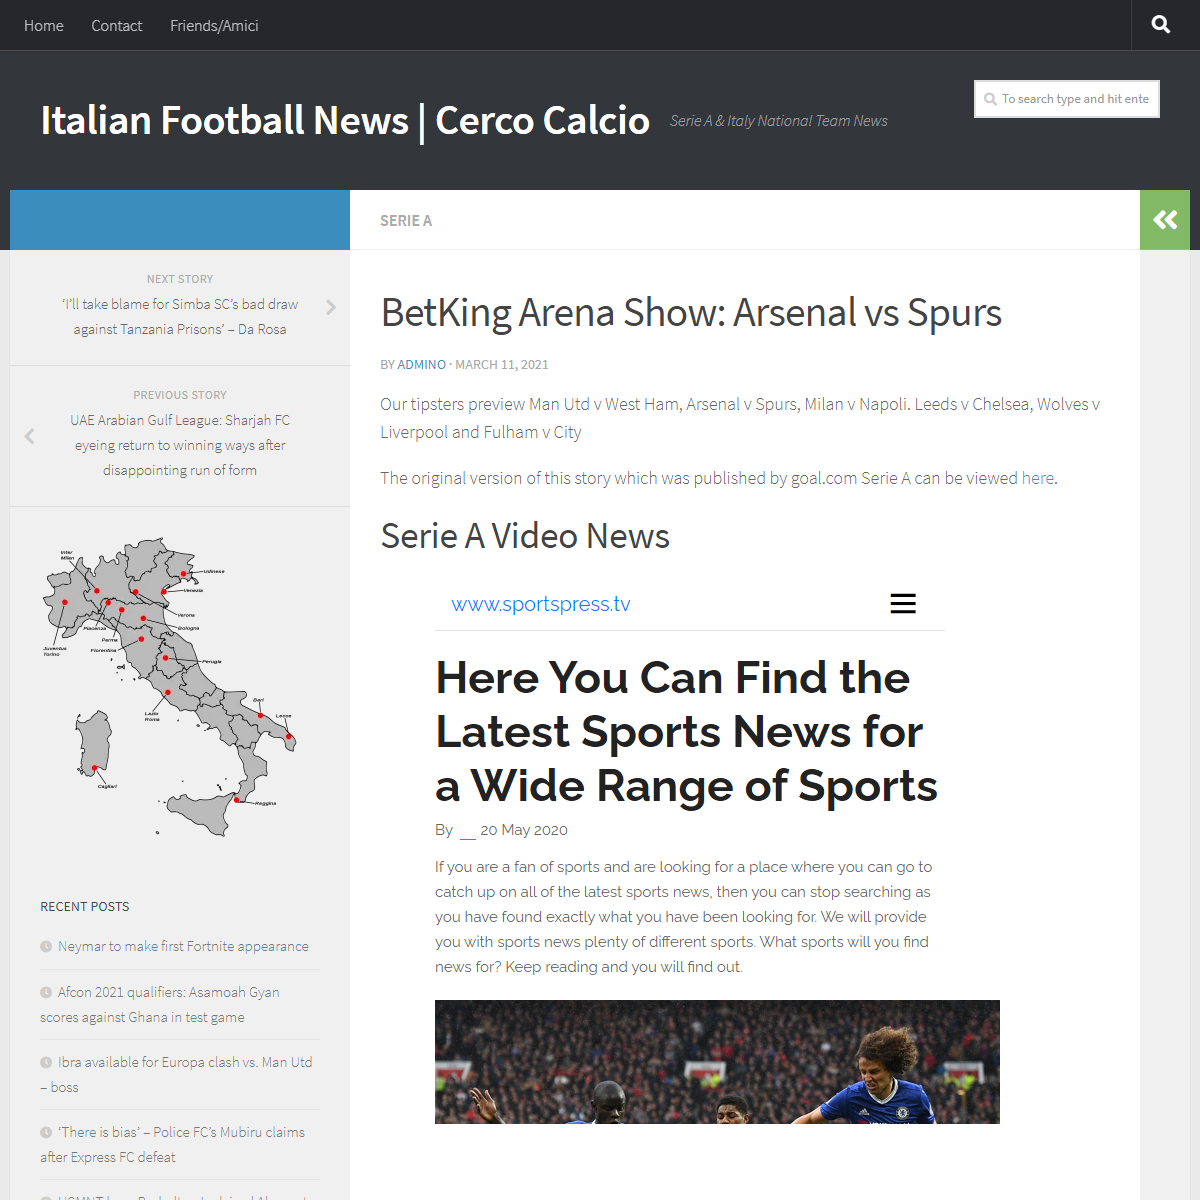 A complete backup of https://www.cercocalcio.com/2021/03/11/betking-arena-show-arsenal-vs-spurs/